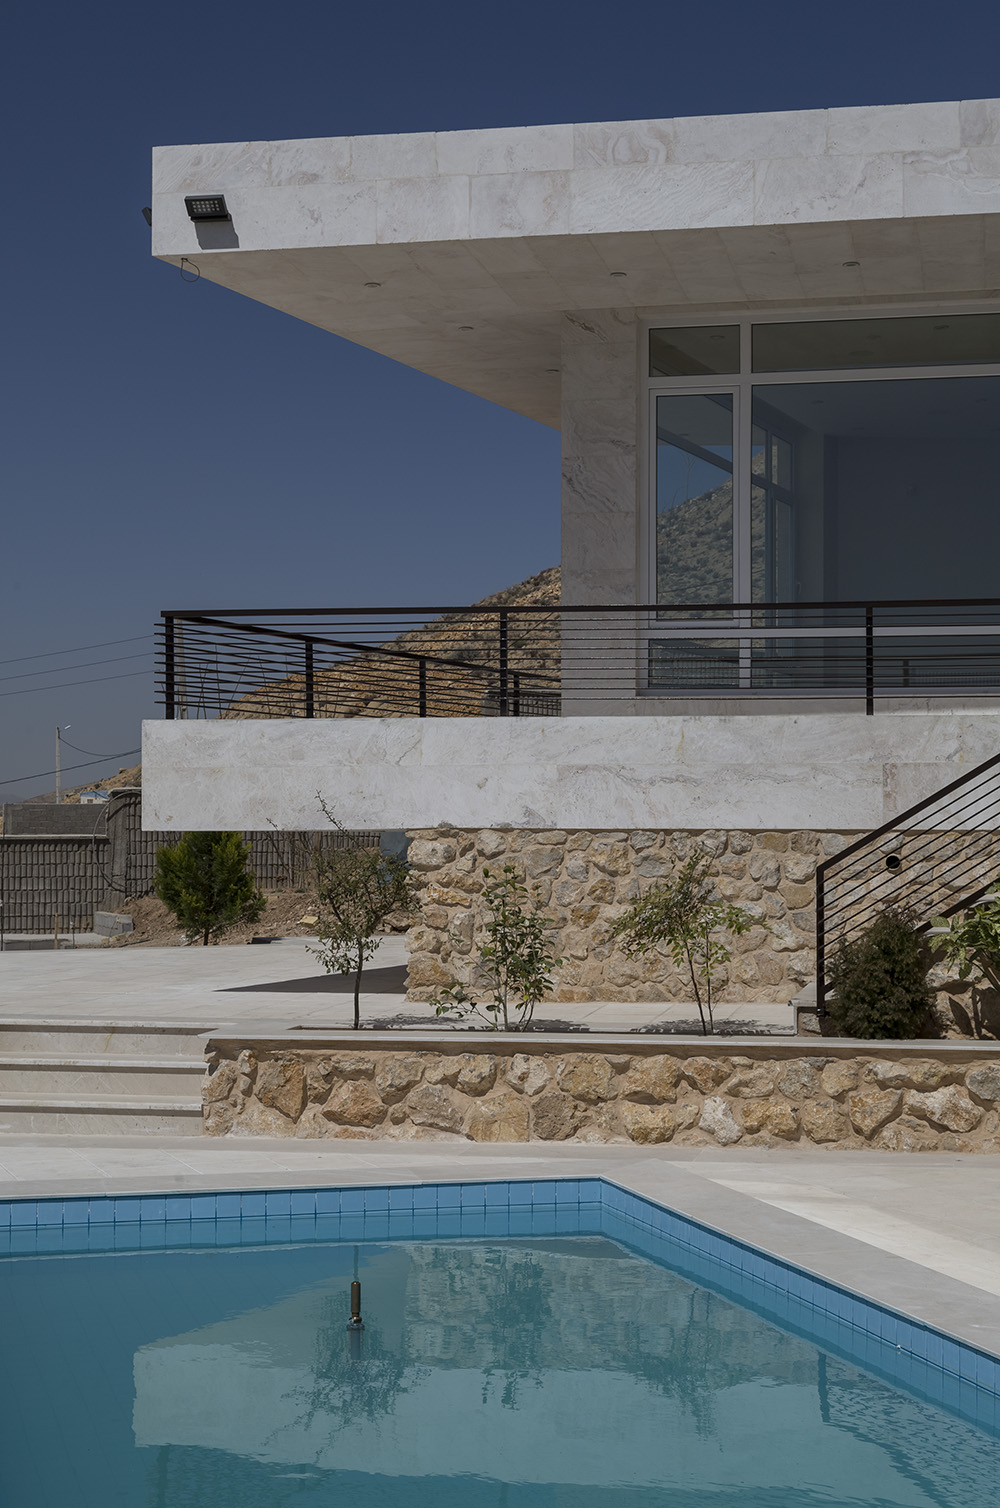 picture no. 5 ofVilla No. 02 project, designed by Ahmad Ghodsimanesh & Partners